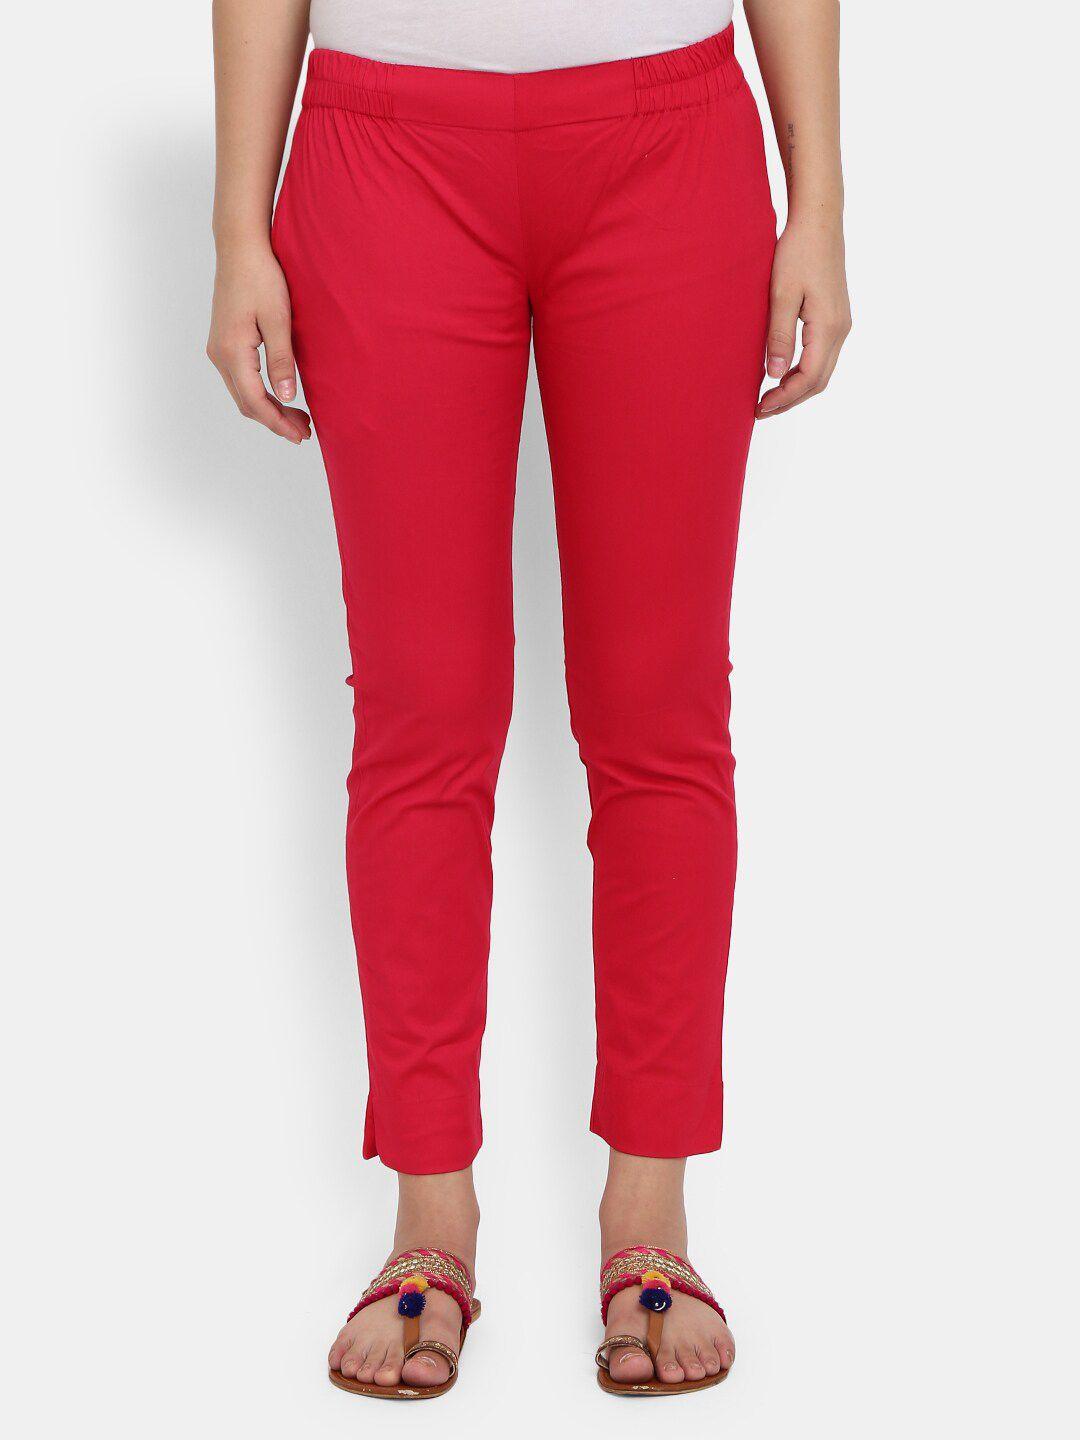 v-mart-women-red-solid-slim-fit-trousers